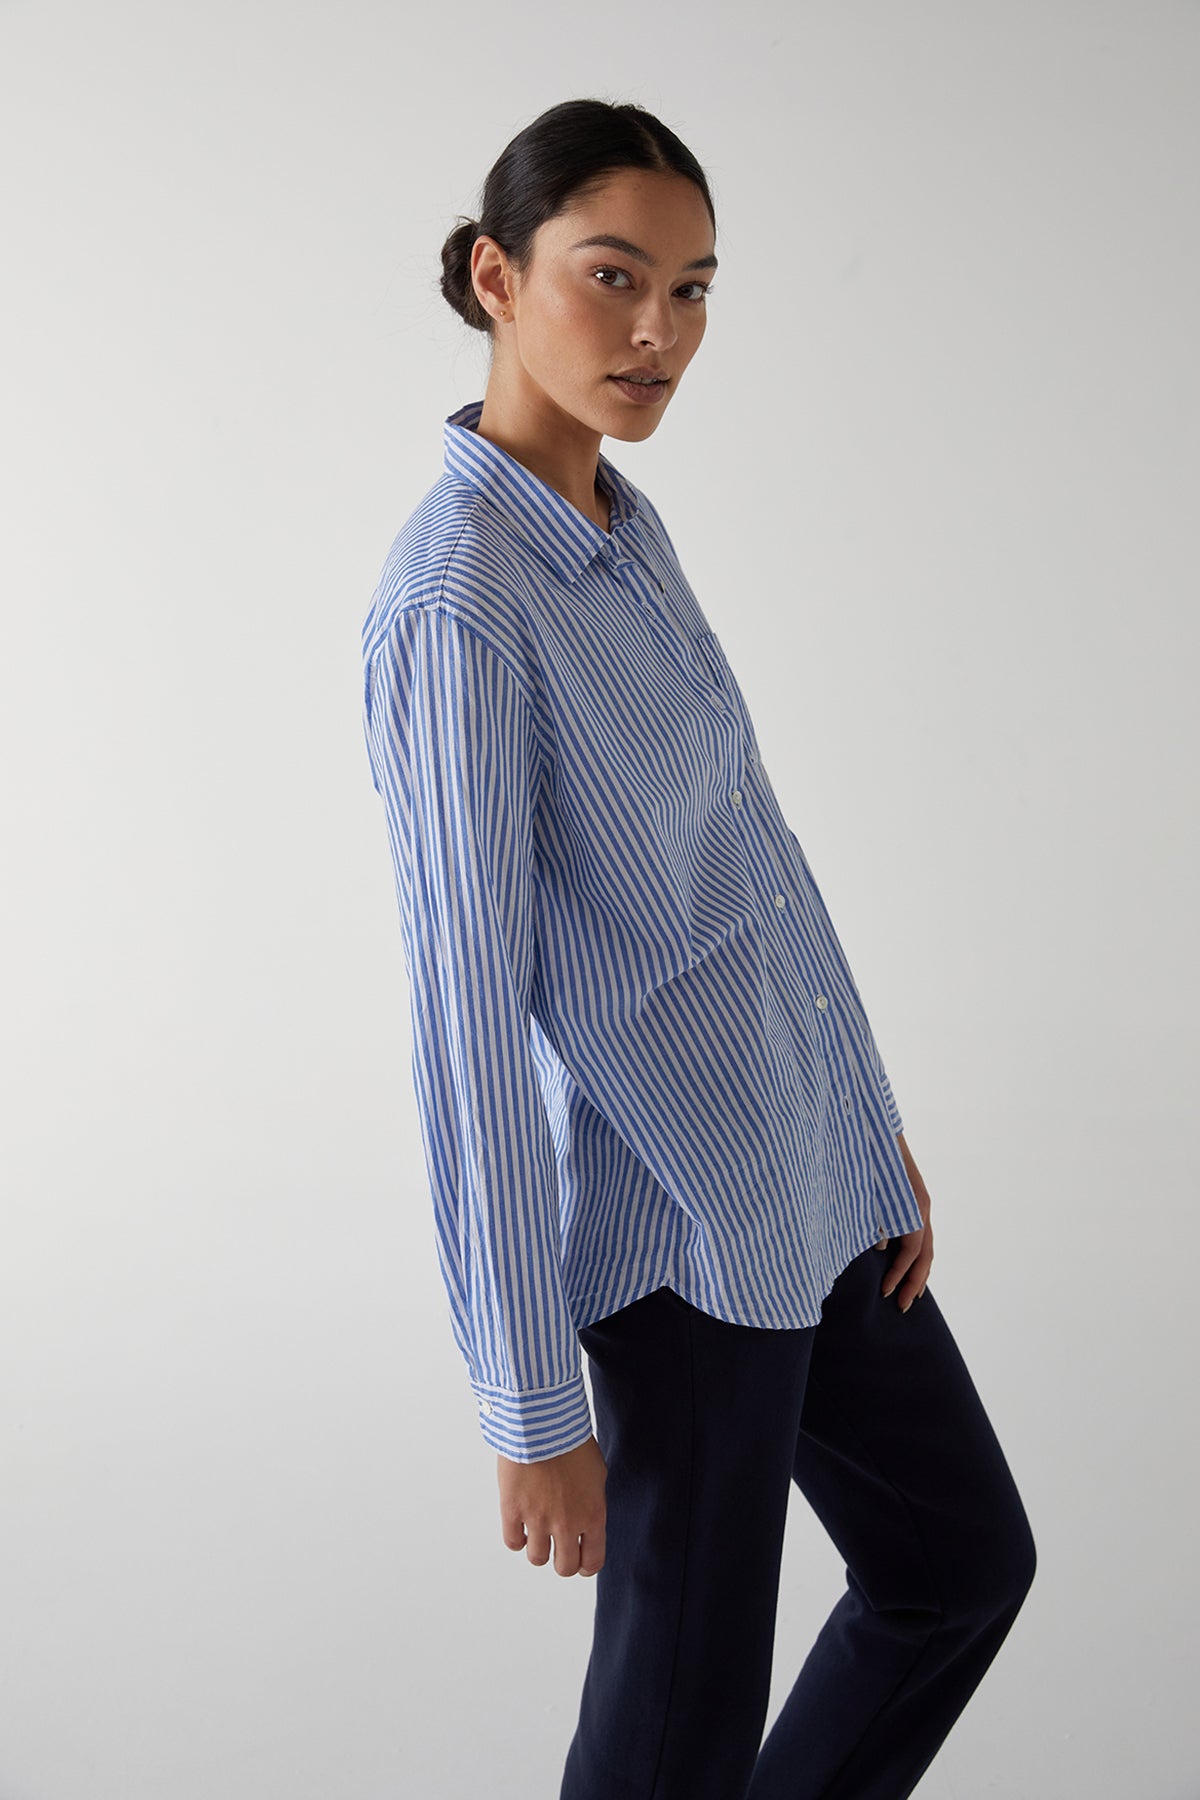   Newport Blue and White Stripe Button Down Cotton Shirt Side 